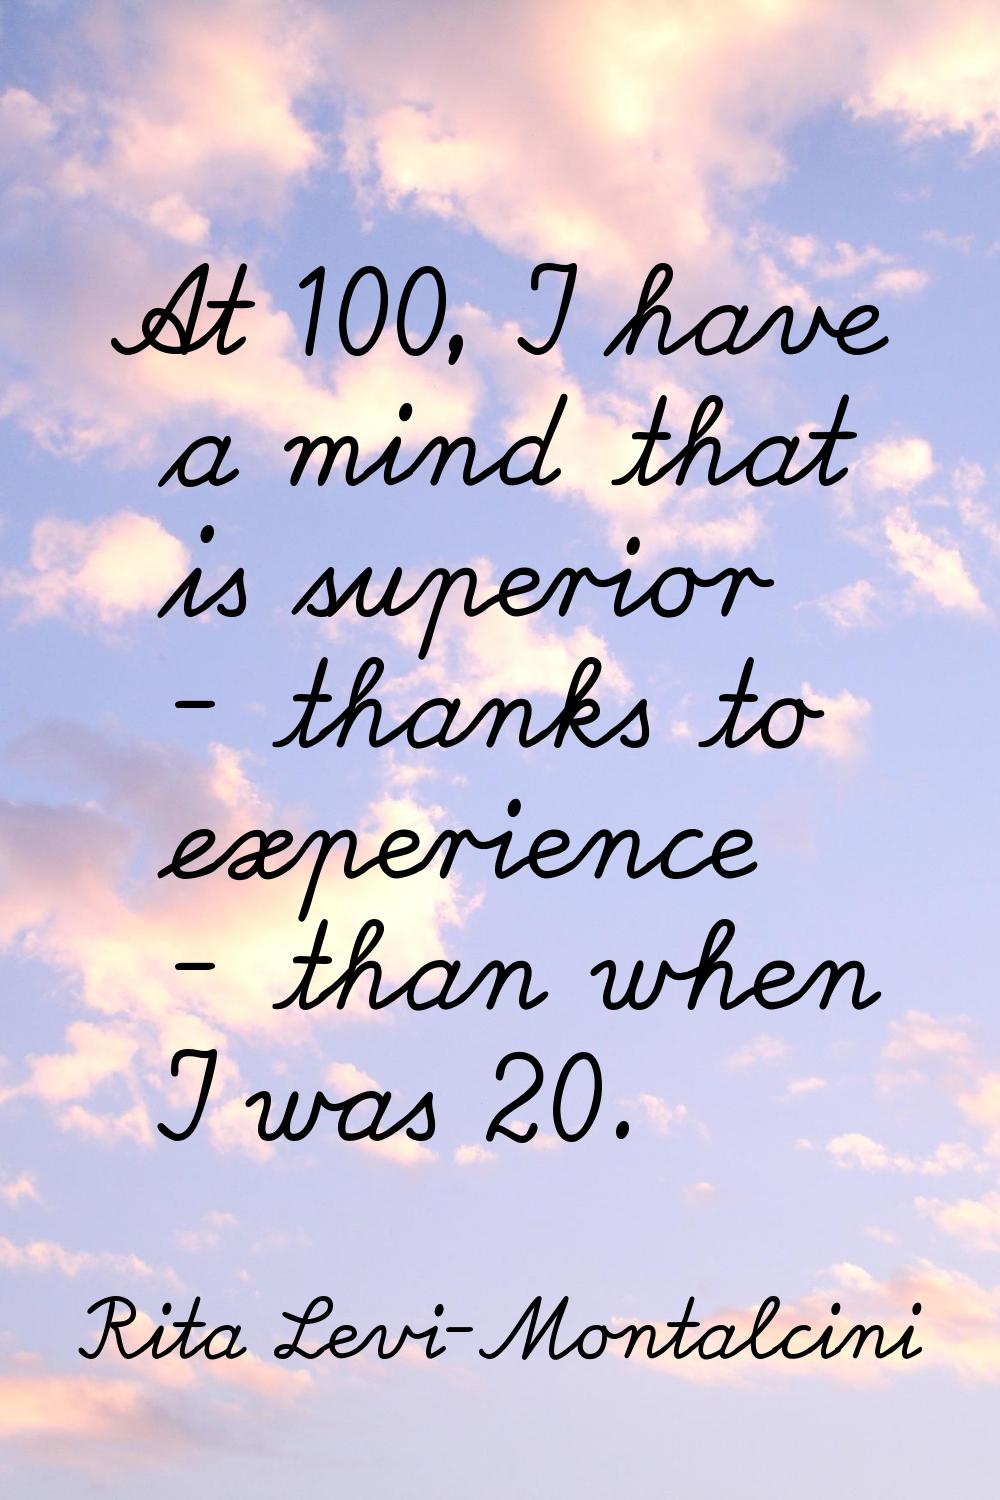 At 100, I have a mind that is superior - thanks to experience - than when I was 20.